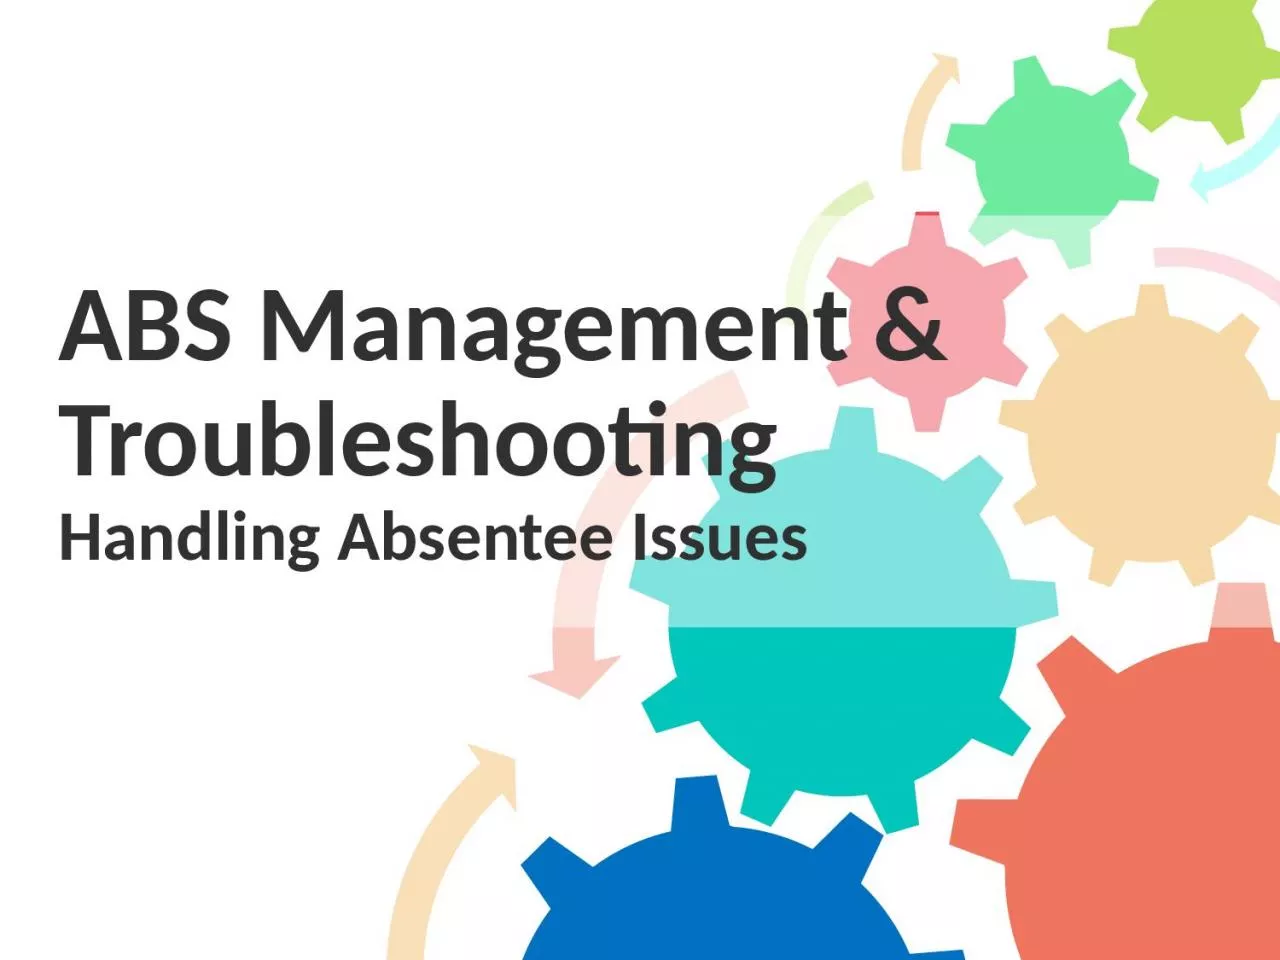 ABS Management & Troubleshooting